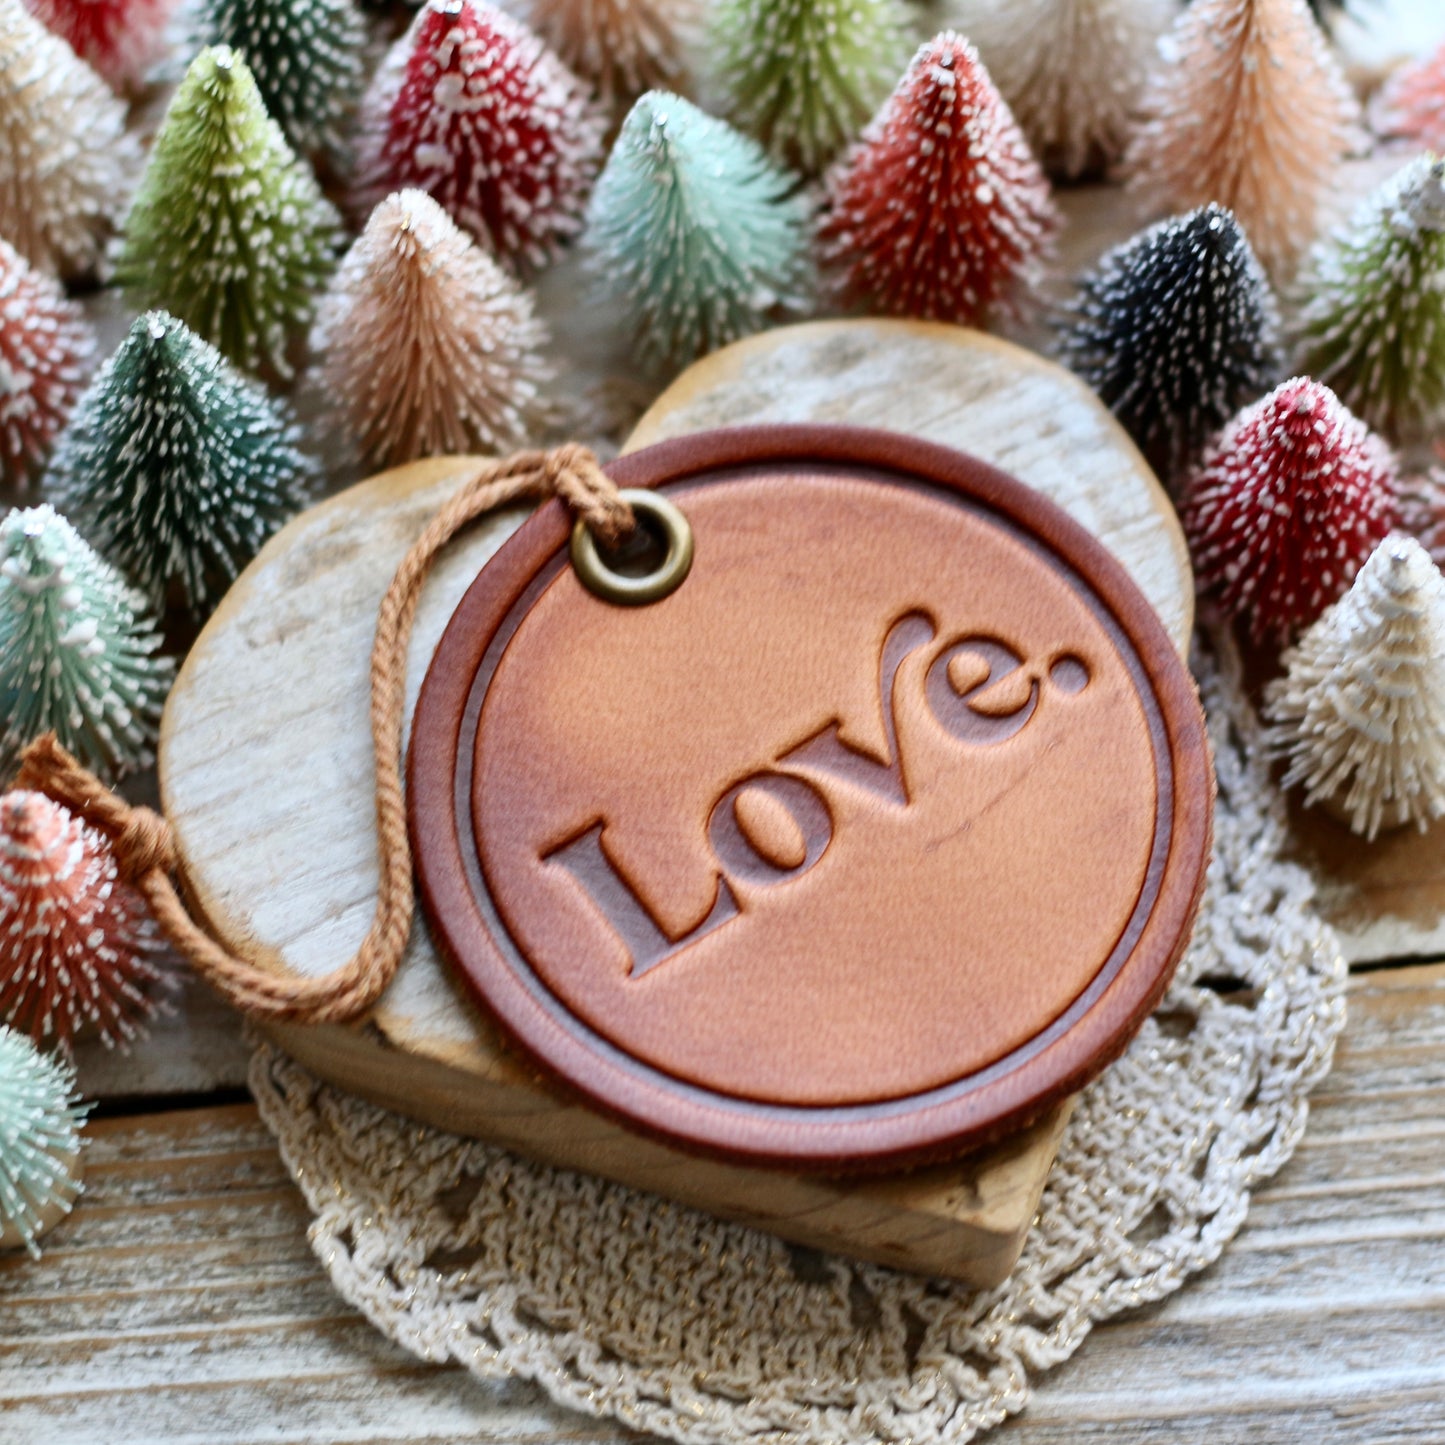 leather hand-stamped ornament - Love